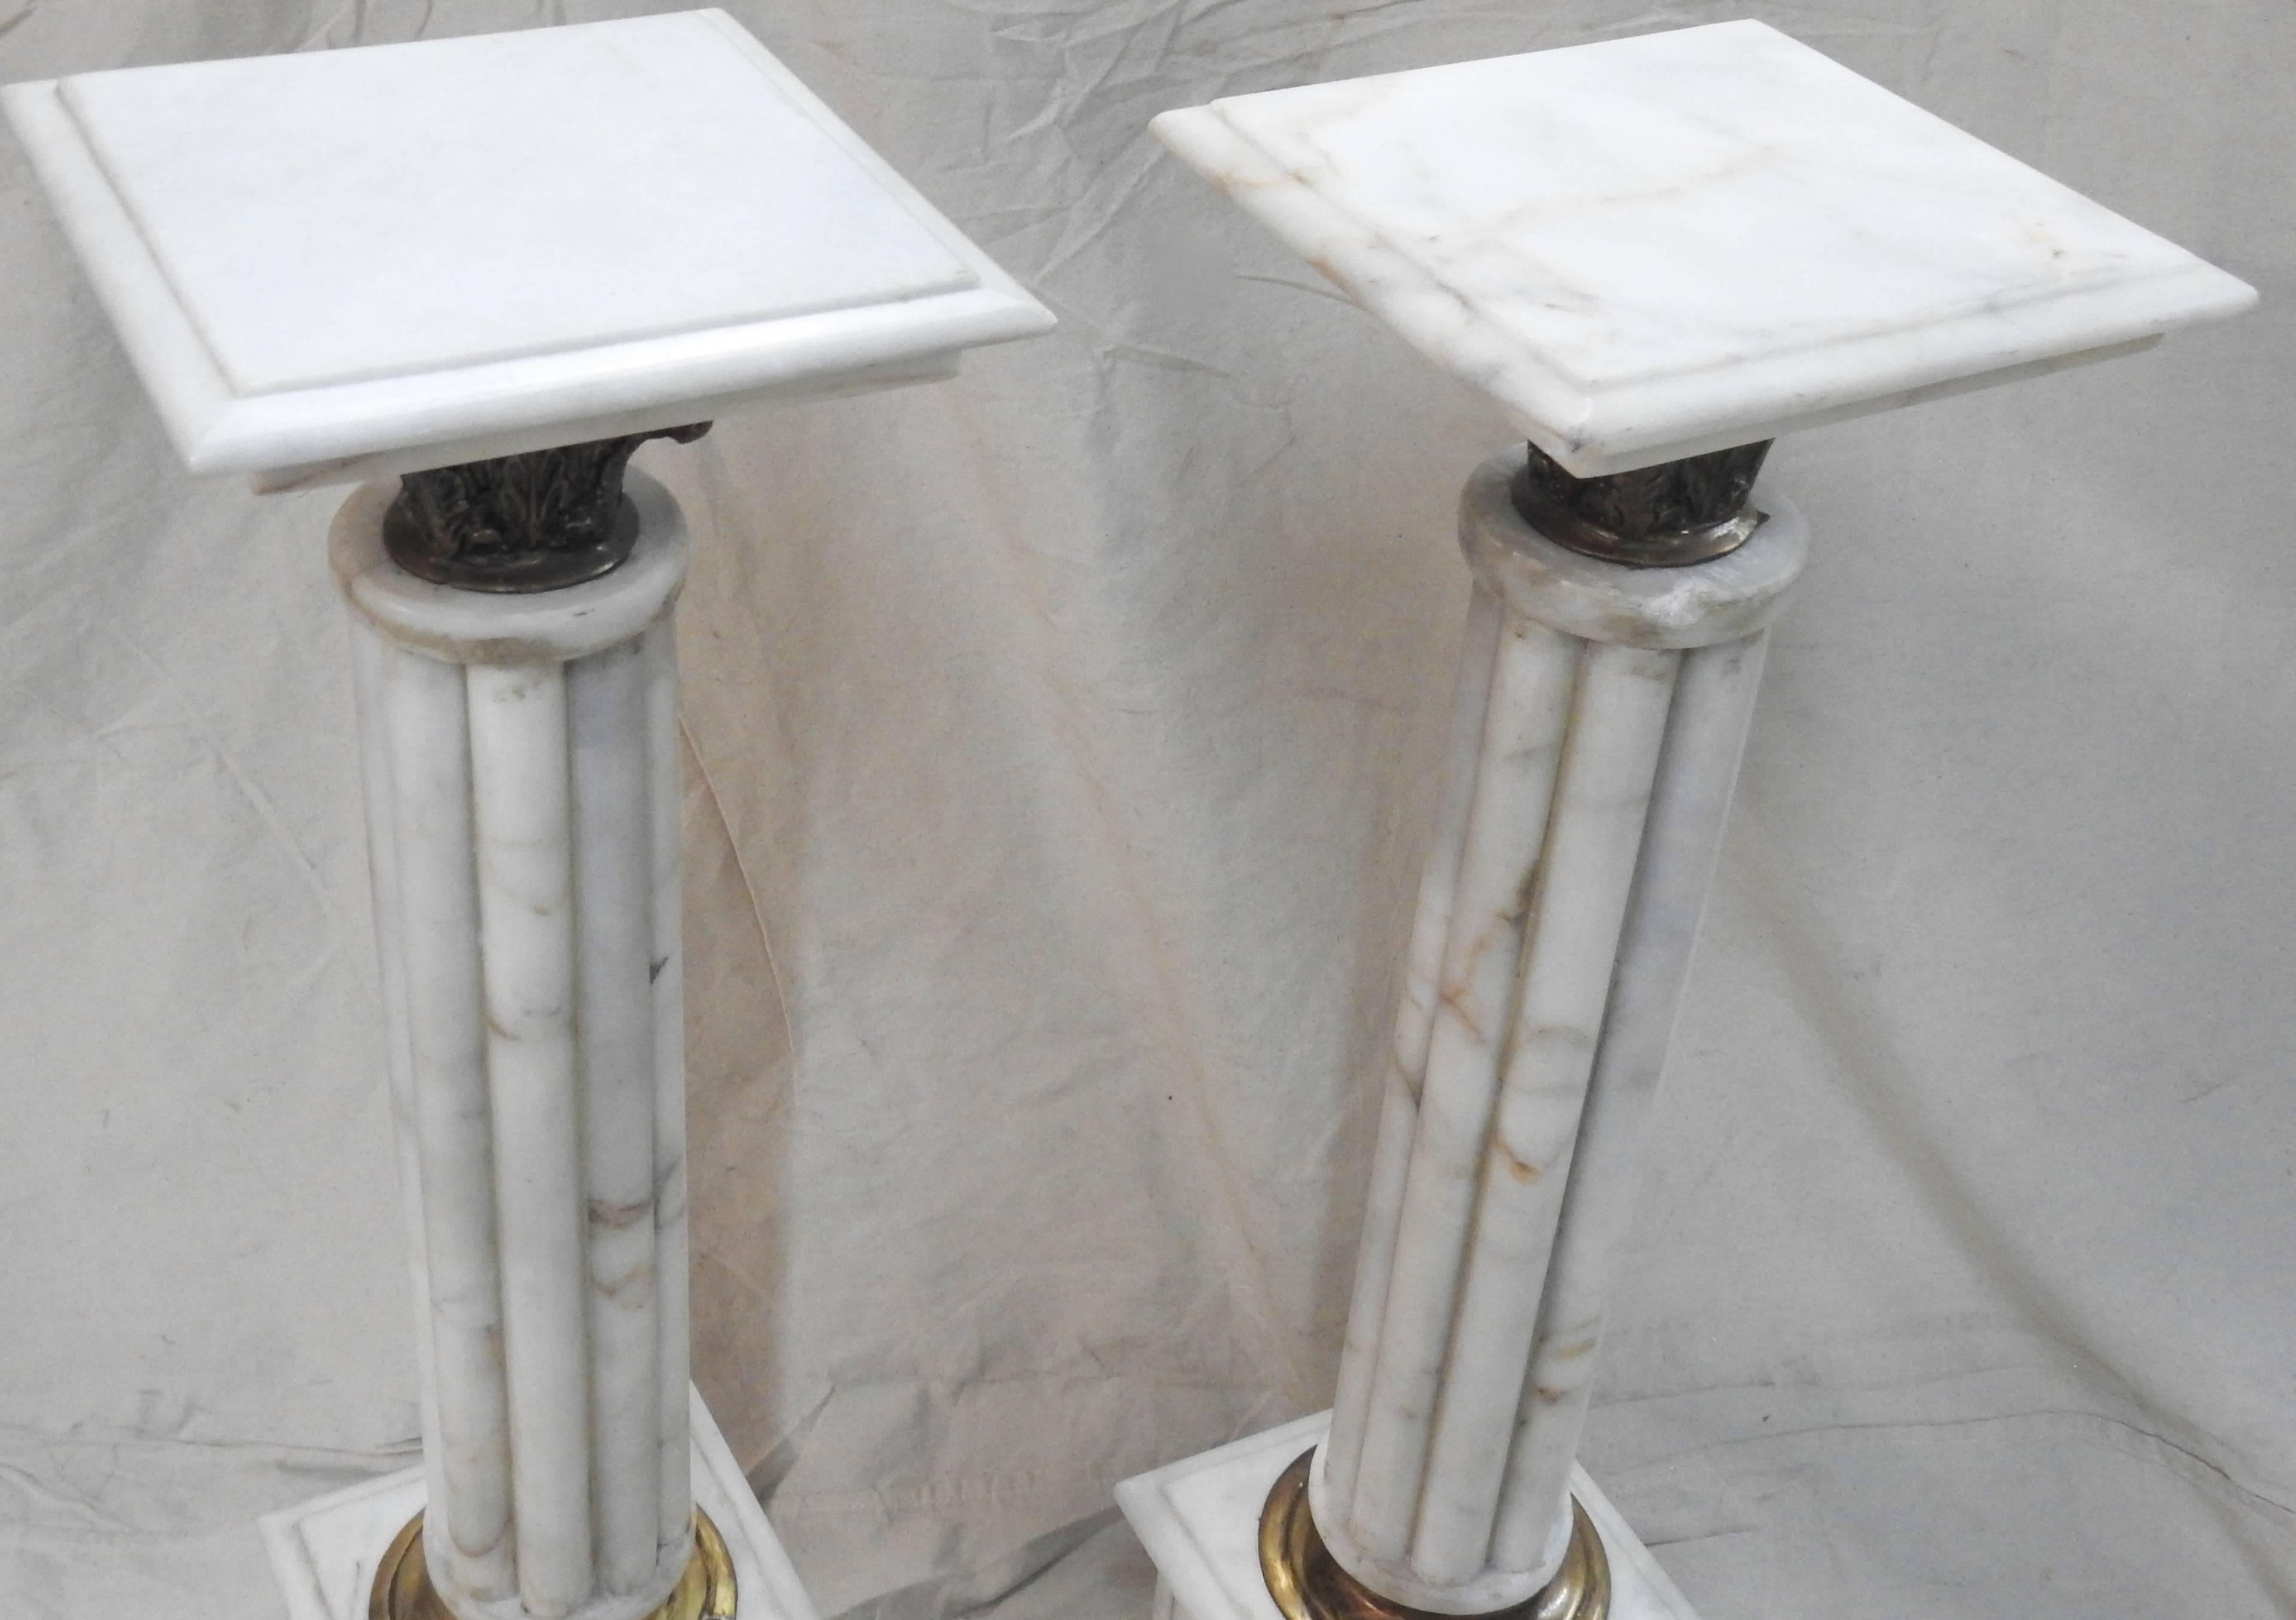 Featured is an elegant pair of Carrara marble pedestals in shades of white with grey. The square top will be a perfect place to display your prized possessions or a trailing plant. They are enhanced with cast bronze details.